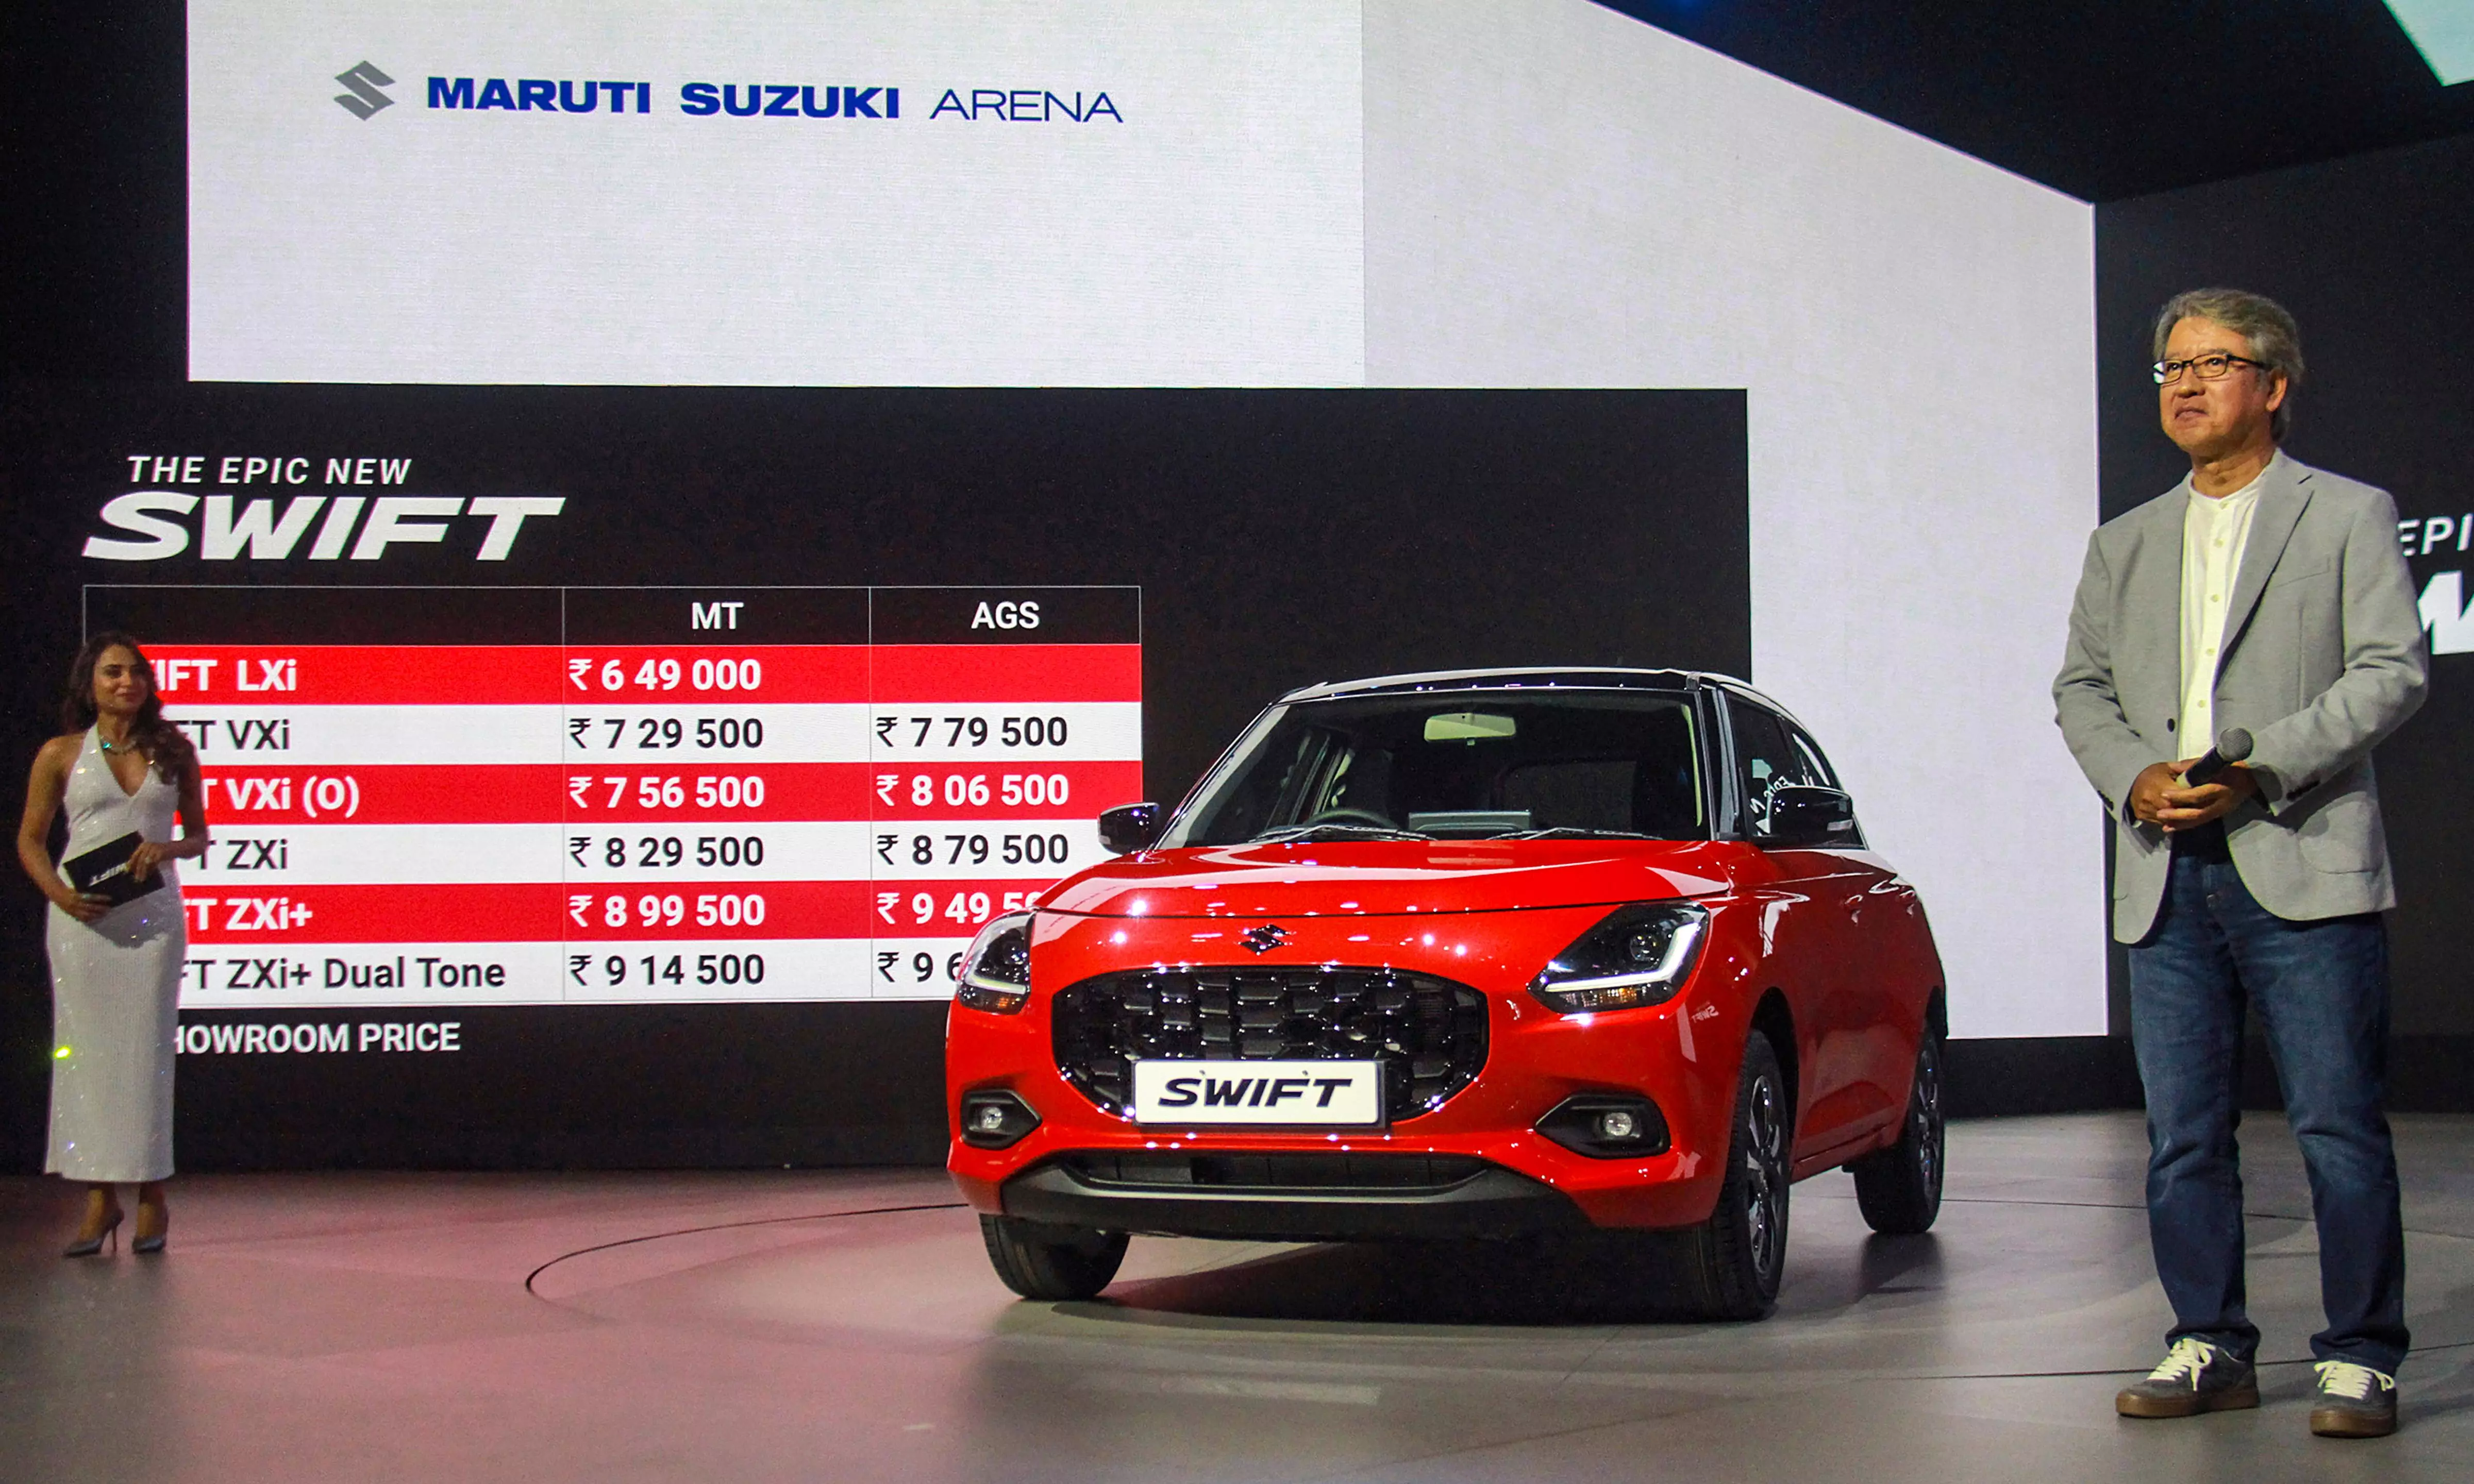 Maruti Suzuki remains committed to small cars, introduces 4th gen Swift